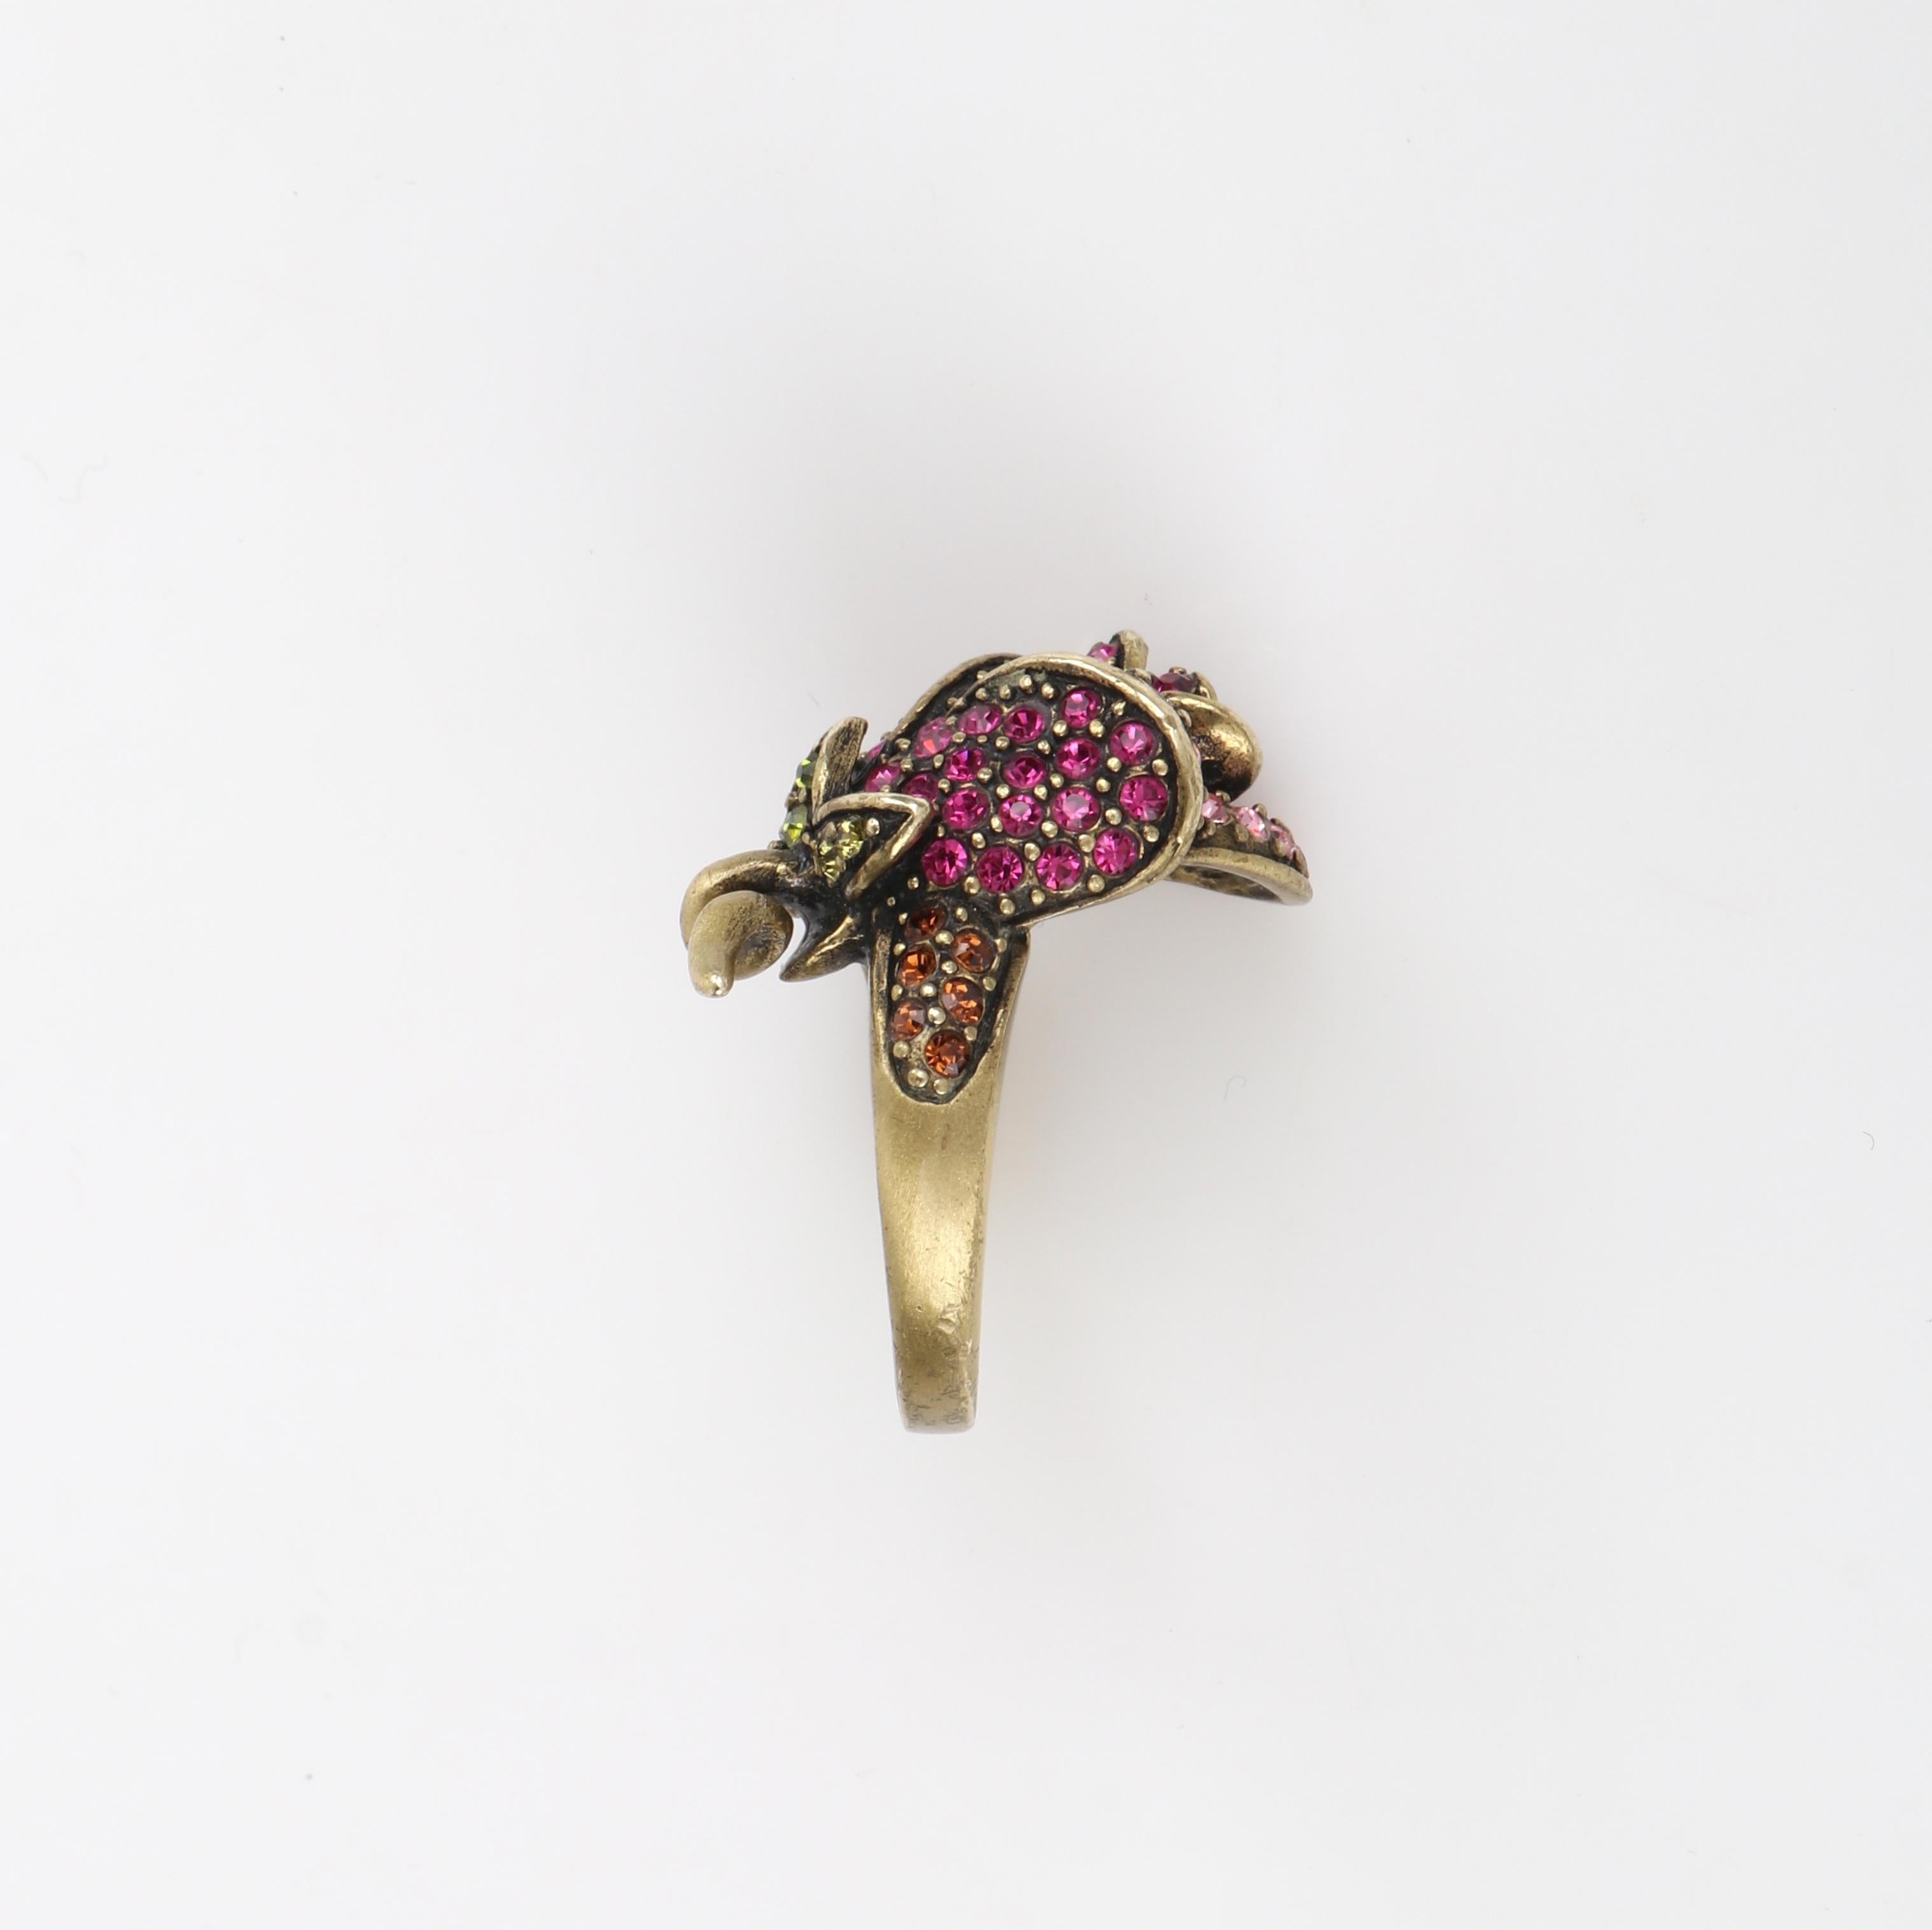 HEIDI DAUS c.2014 “Climbing Roses” Pink Green Swarovski Crystal Floral Rose Ring In Good Condition For Sale In Thiensville, WI